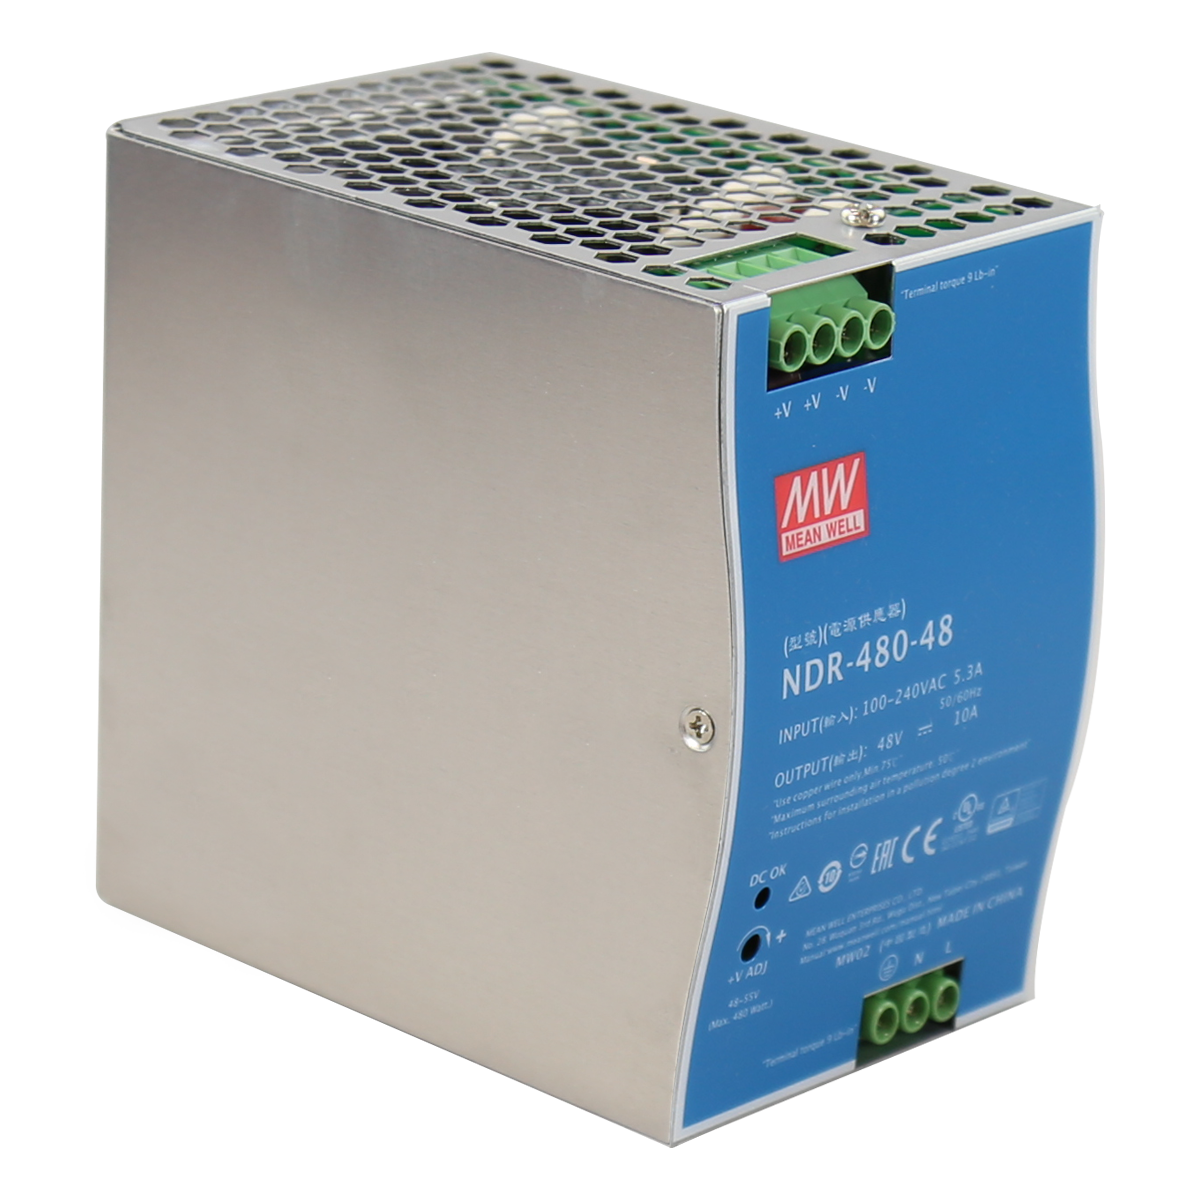 NDR-480-48 - MEAN WELL - Hardened Industrial Power Supply 48V 480W AC/DC 10A AC/DC DIN-Rail